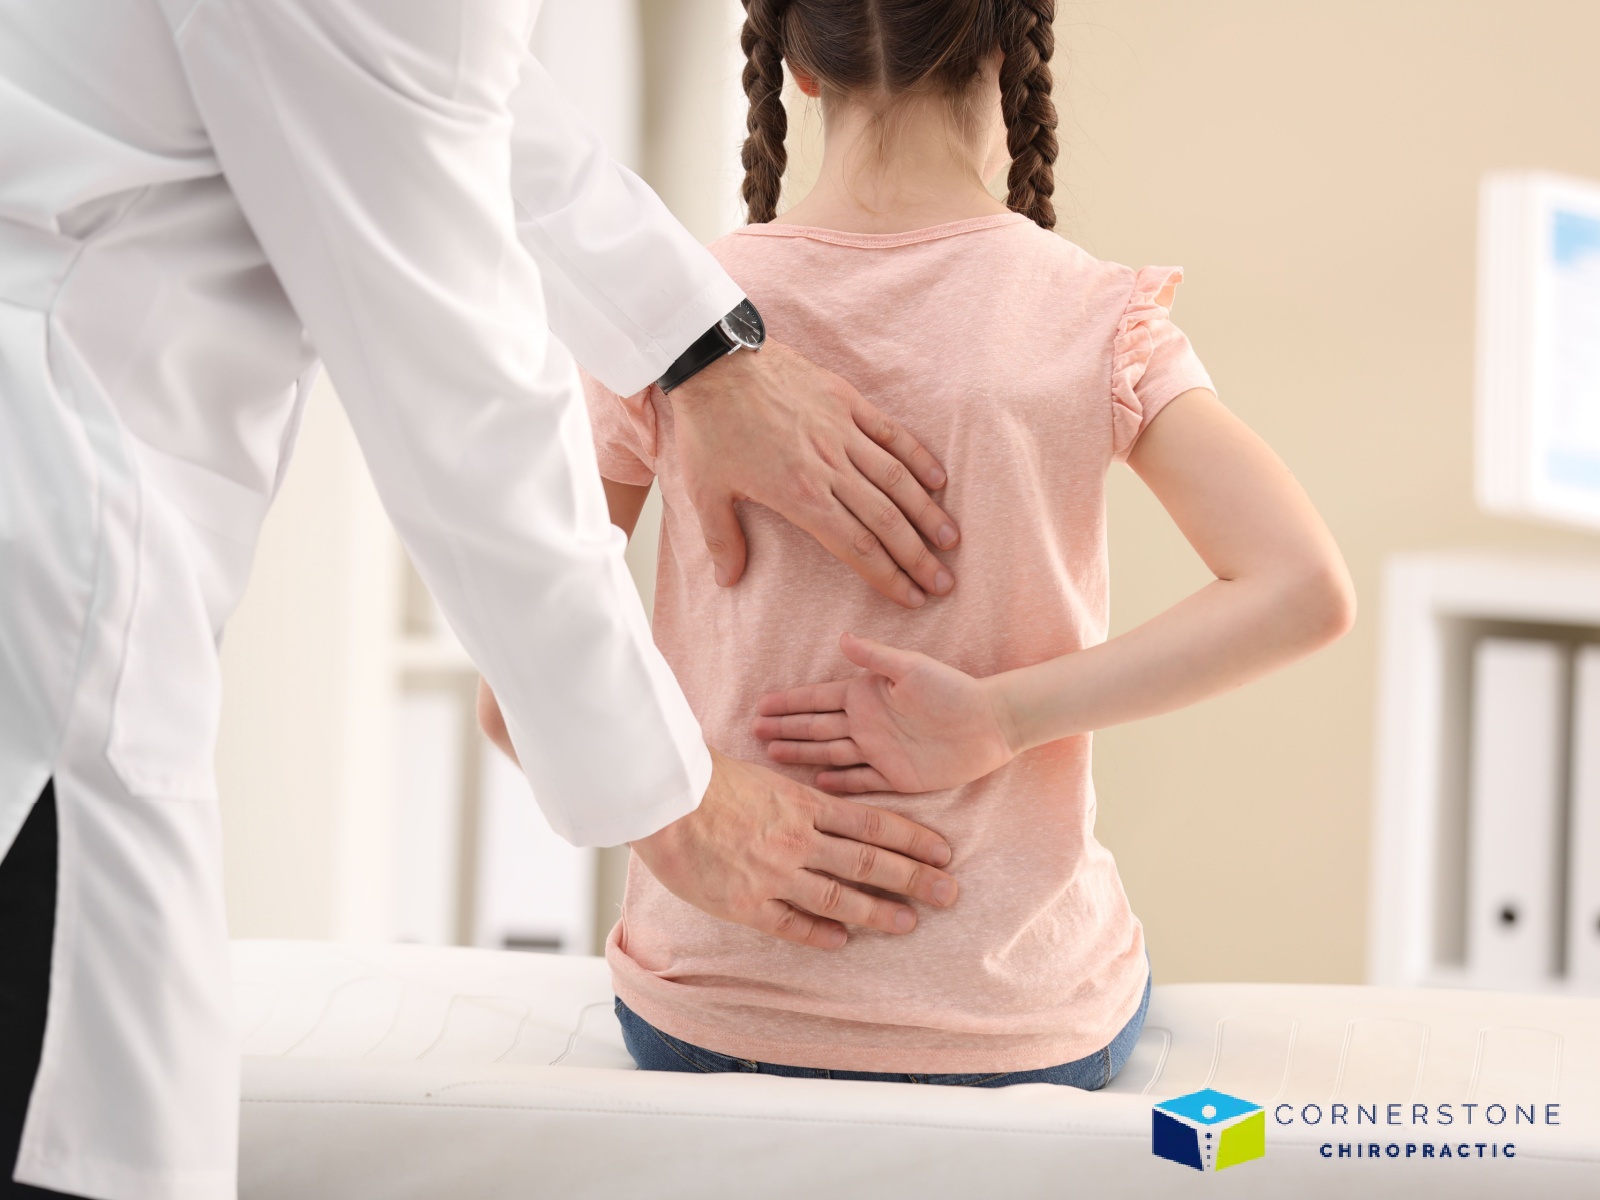 Is It Safe for Kids to See a Pediatric Chiropractor?